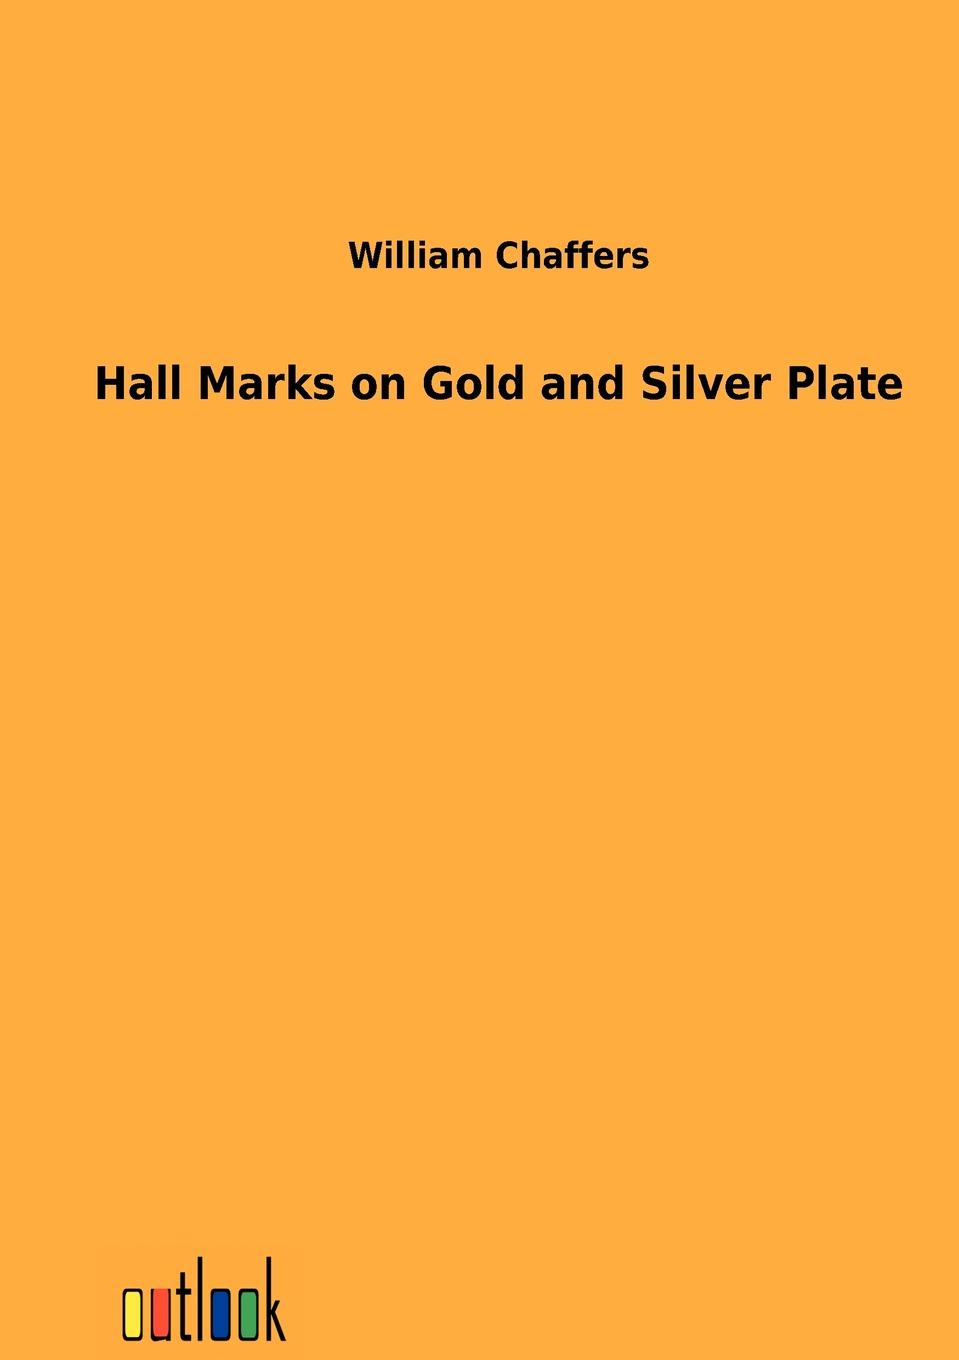 William Chaffers Hall Marks on Gold and Silver Plate